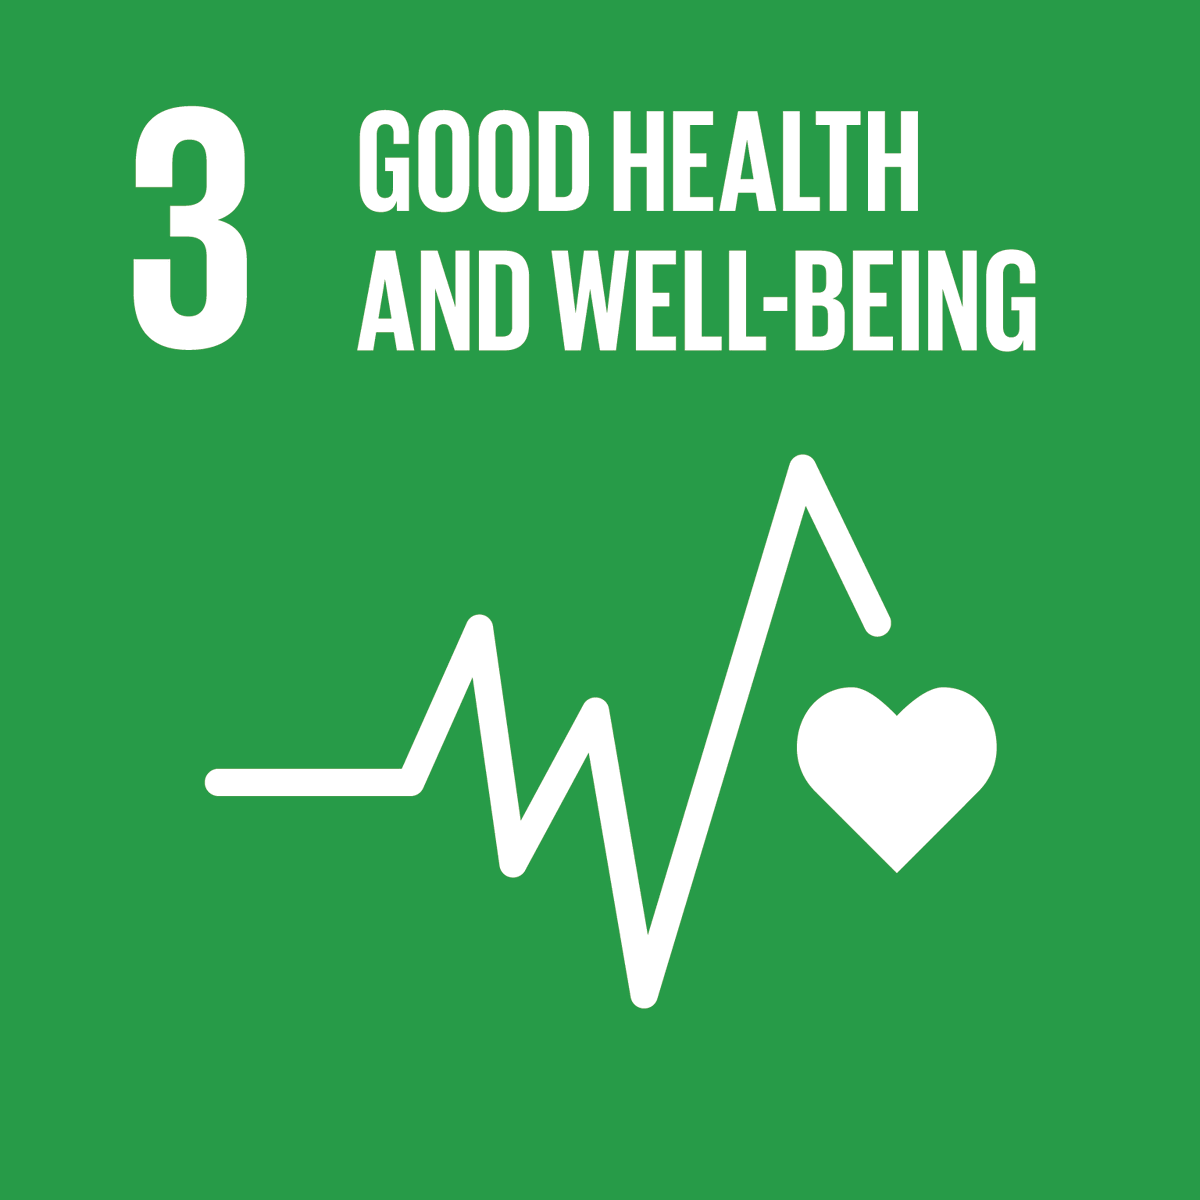 In our efforts to achieve SDG 3, we empower young people with the knowledge, skills, and support they need to make healthy choices, protect their sexual and reproductive health, and navigate the challenges they face. #LeaveNoYouthBehind